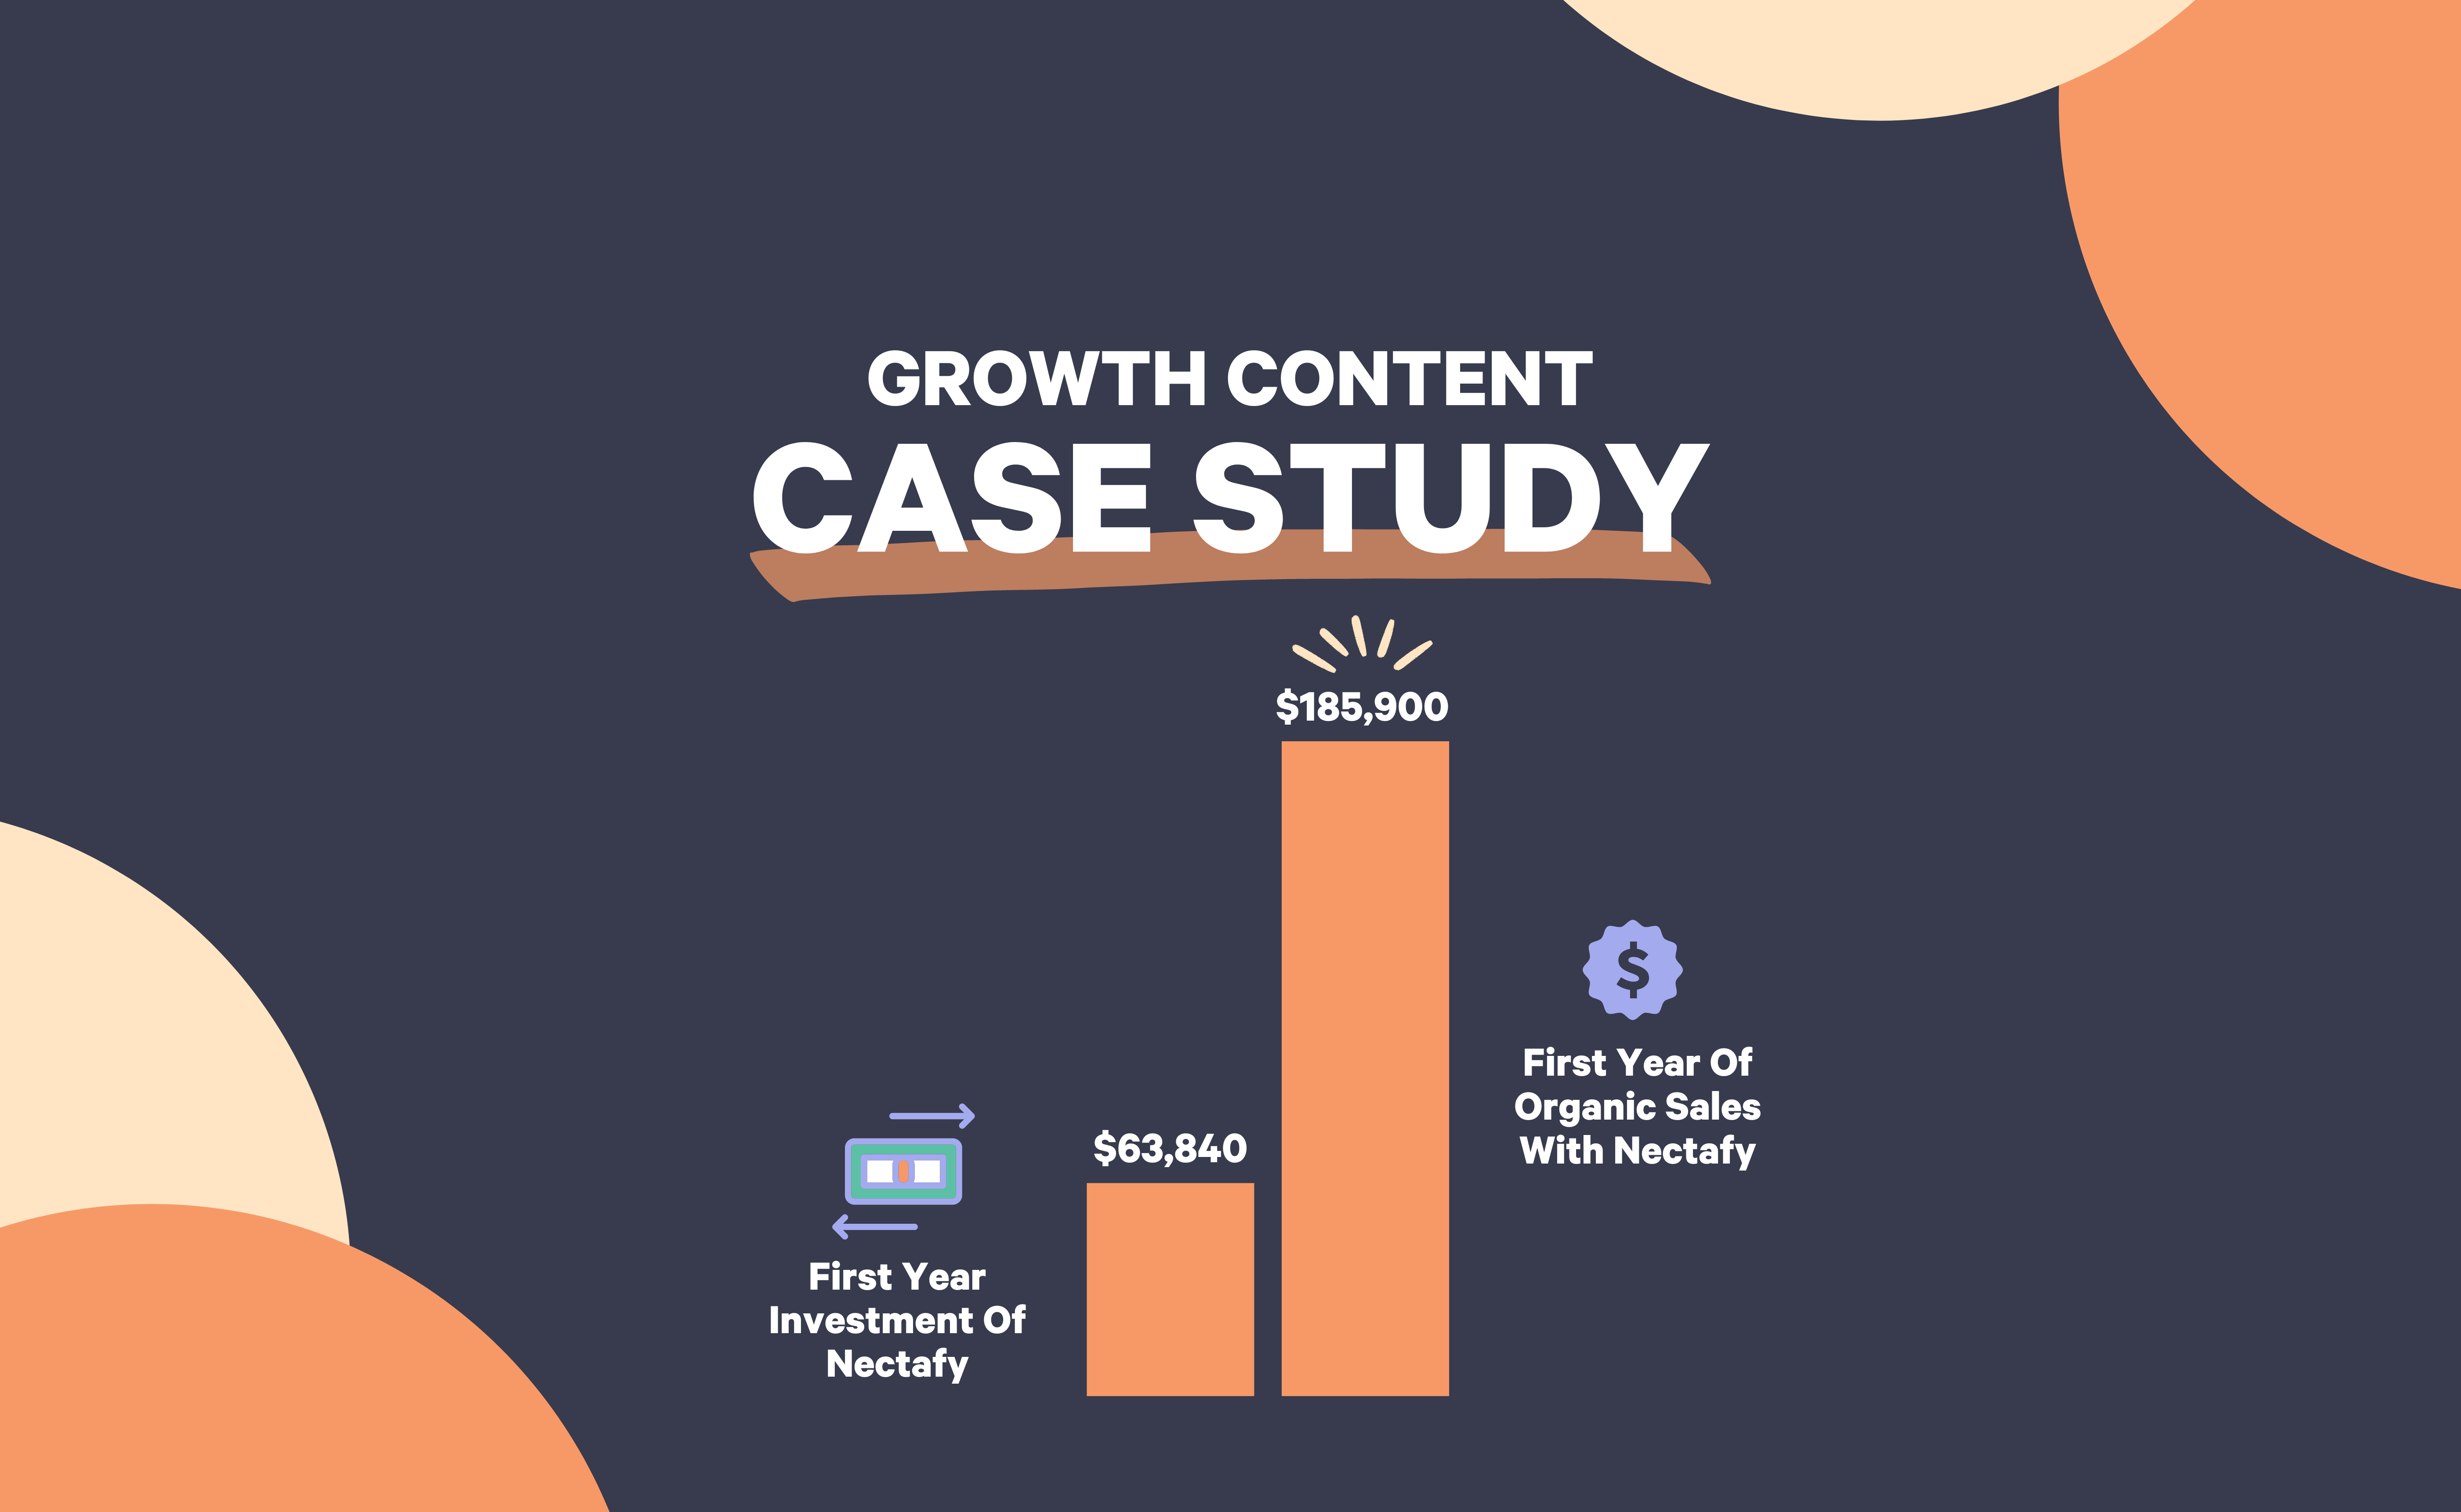 B2B SaaS Startup Sees 190% ROI With First Year Of Growth Content! [Case Study]